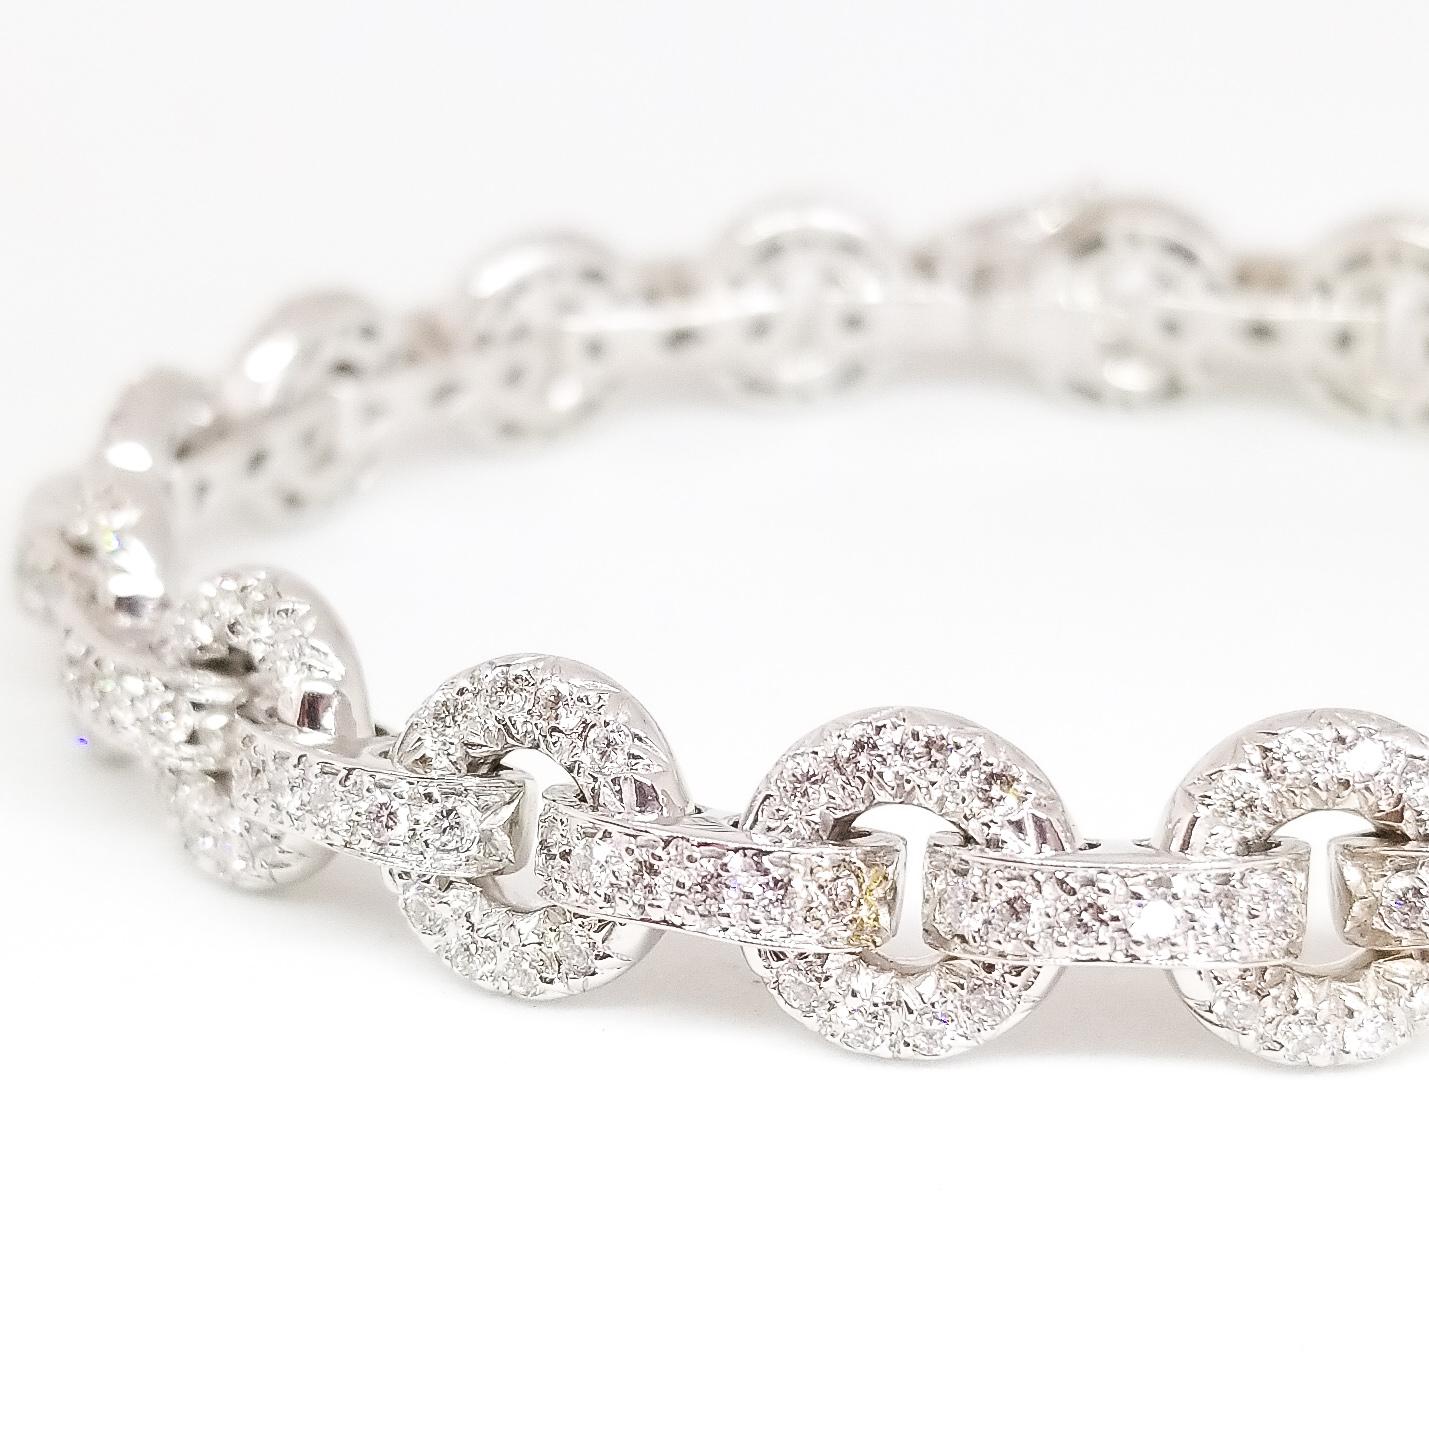 Round Brilliant Diamond Tennis Bracelet features Round Brilliant Diamonds of 5.50 Carats total weight set in Circle and Bar Links around  the entire Bracelet. The Diamonds are of G Color and Vs -Si1 Clarity. The Bracelet is both a classic and